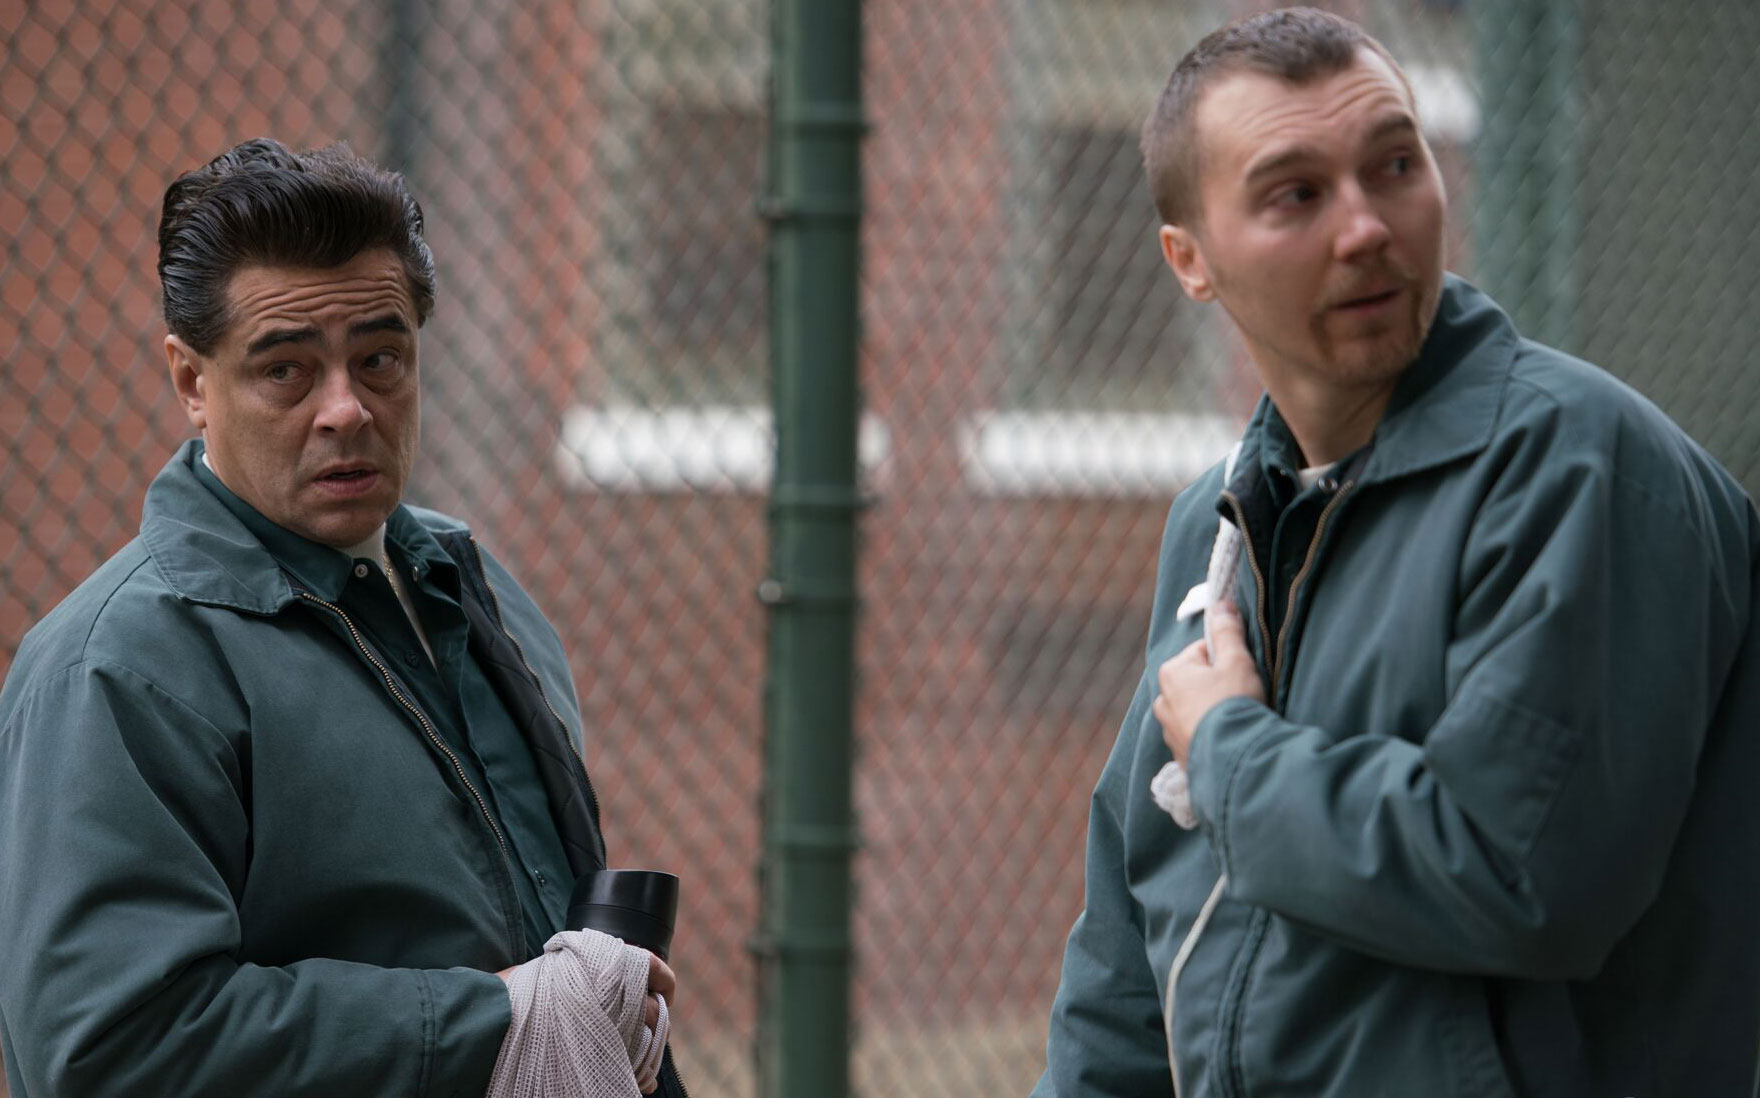 The Wild True Story Behind New Crime Series ‘Escape At Dannemora’